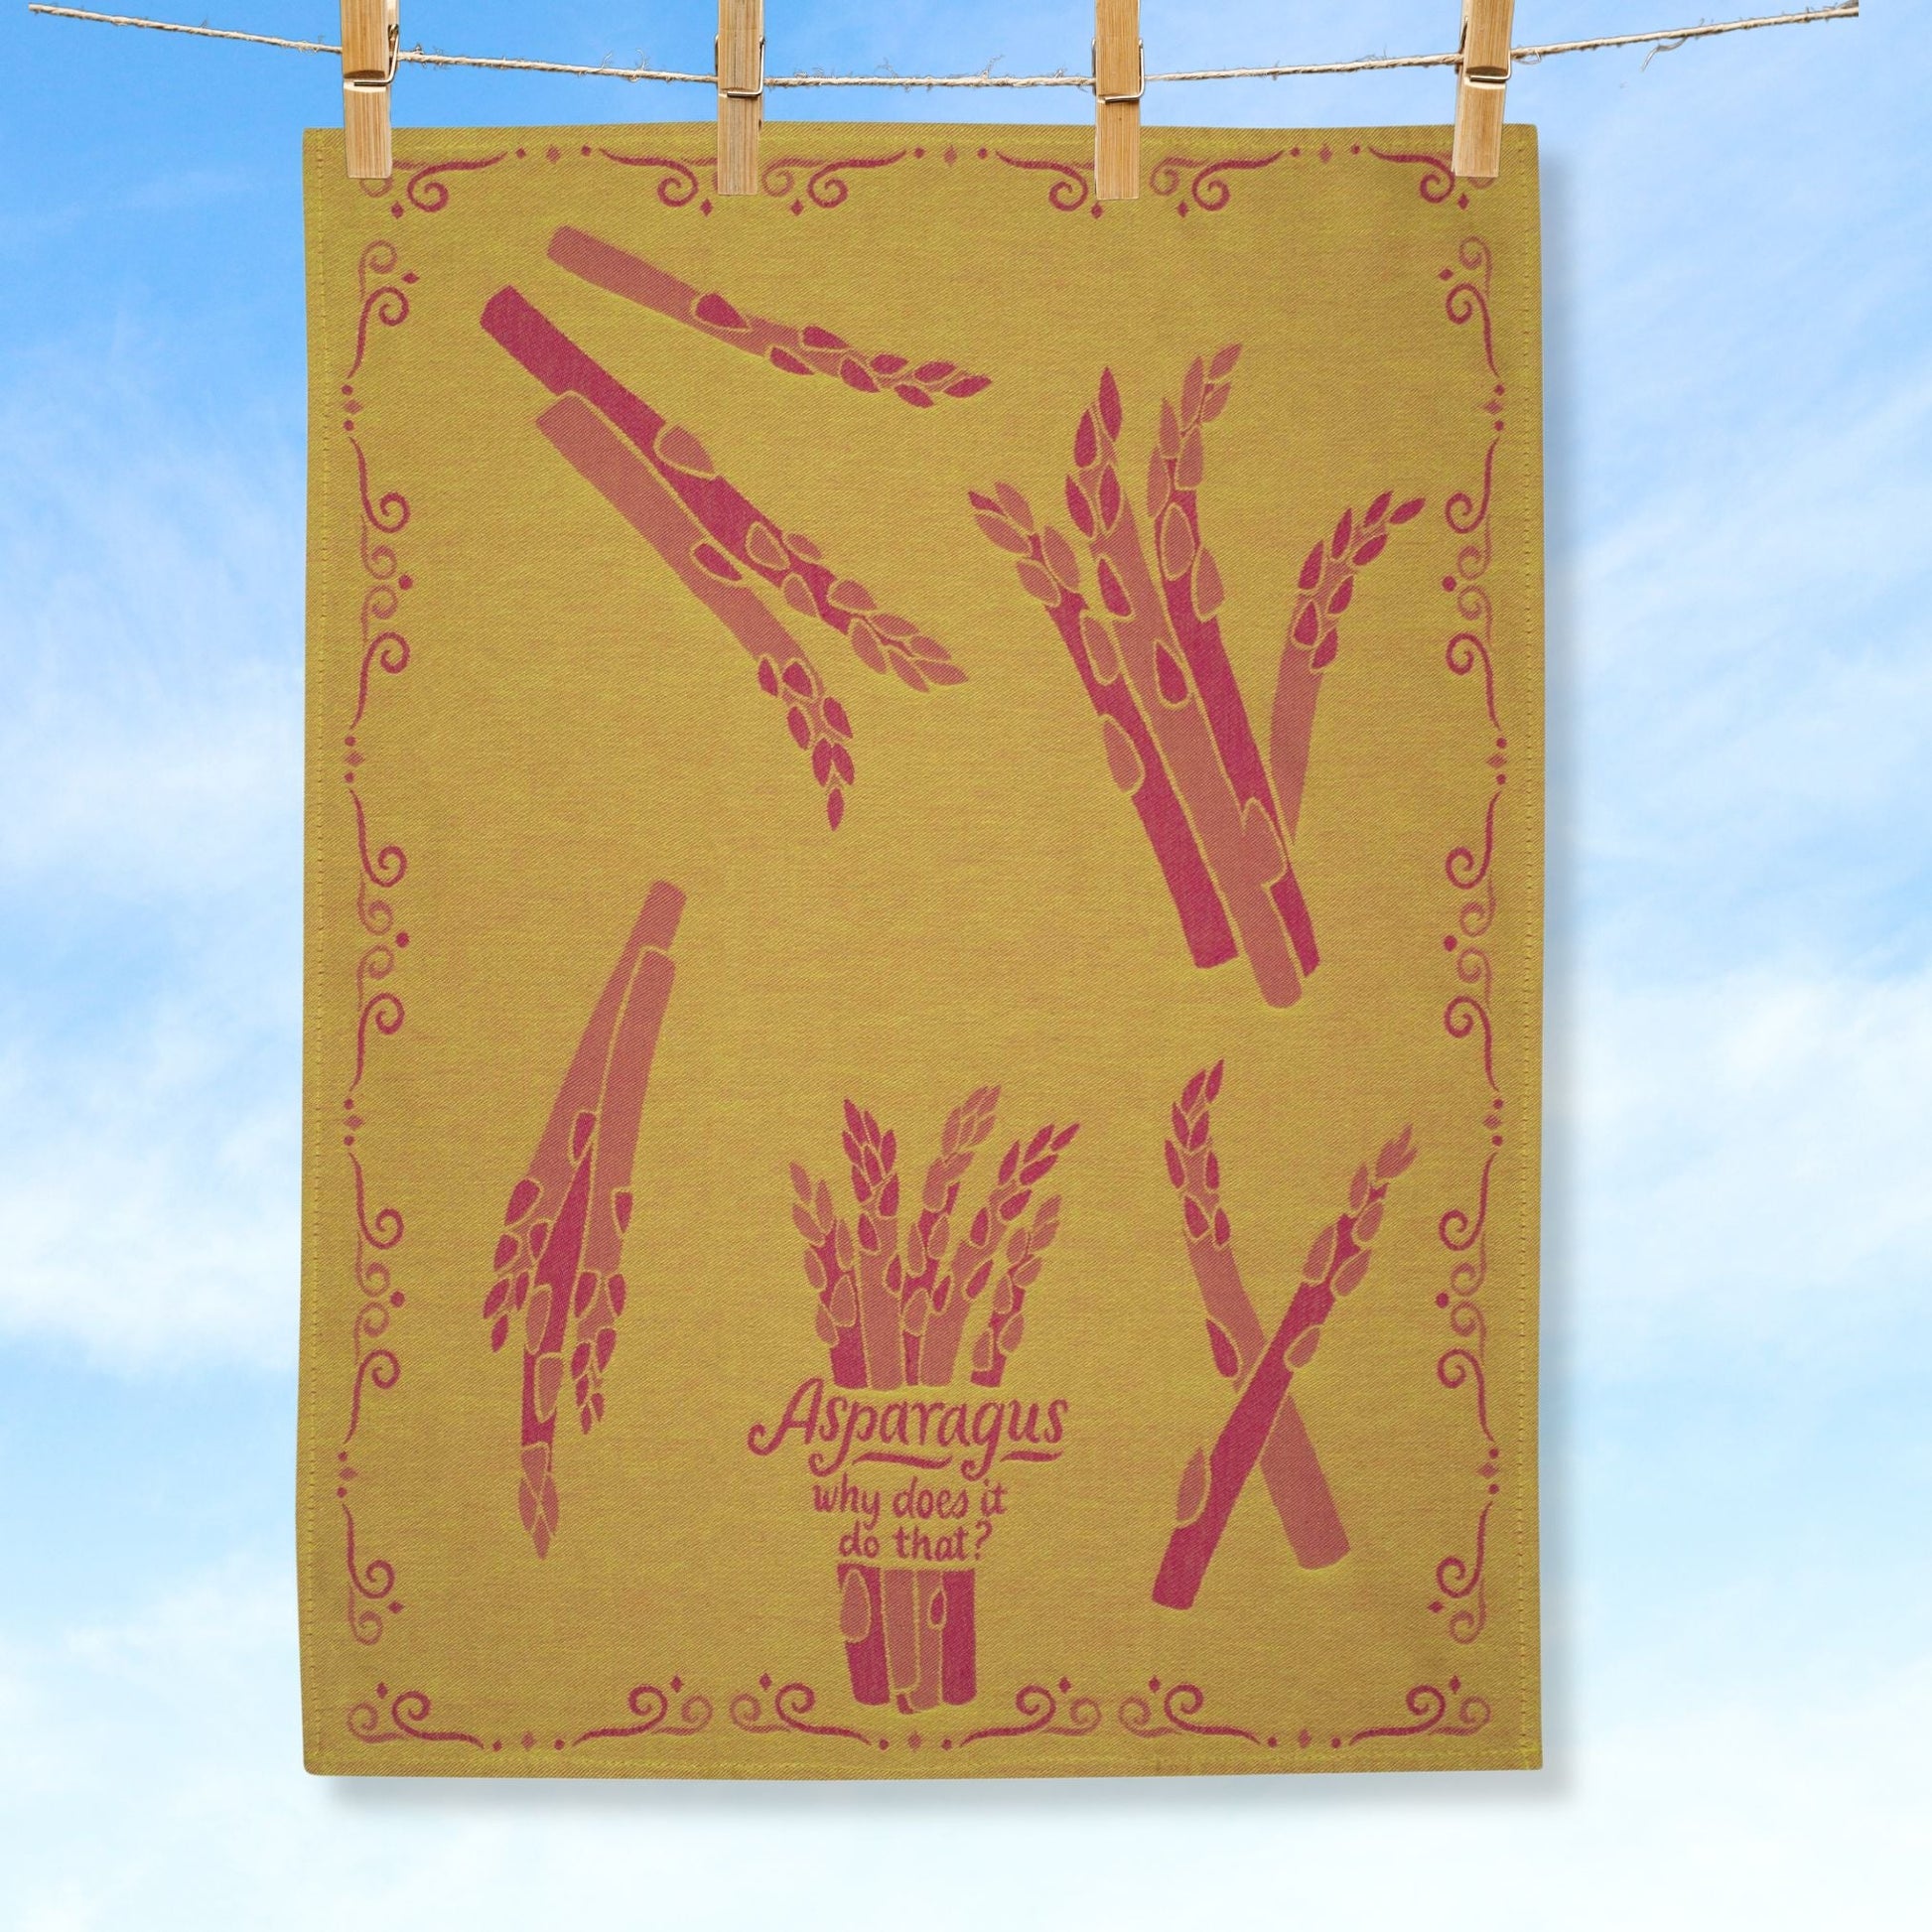 Asparagus Why Does it Do That Funny Woven Kitchen Tea Dish Cloth Towel | 21" x 28"